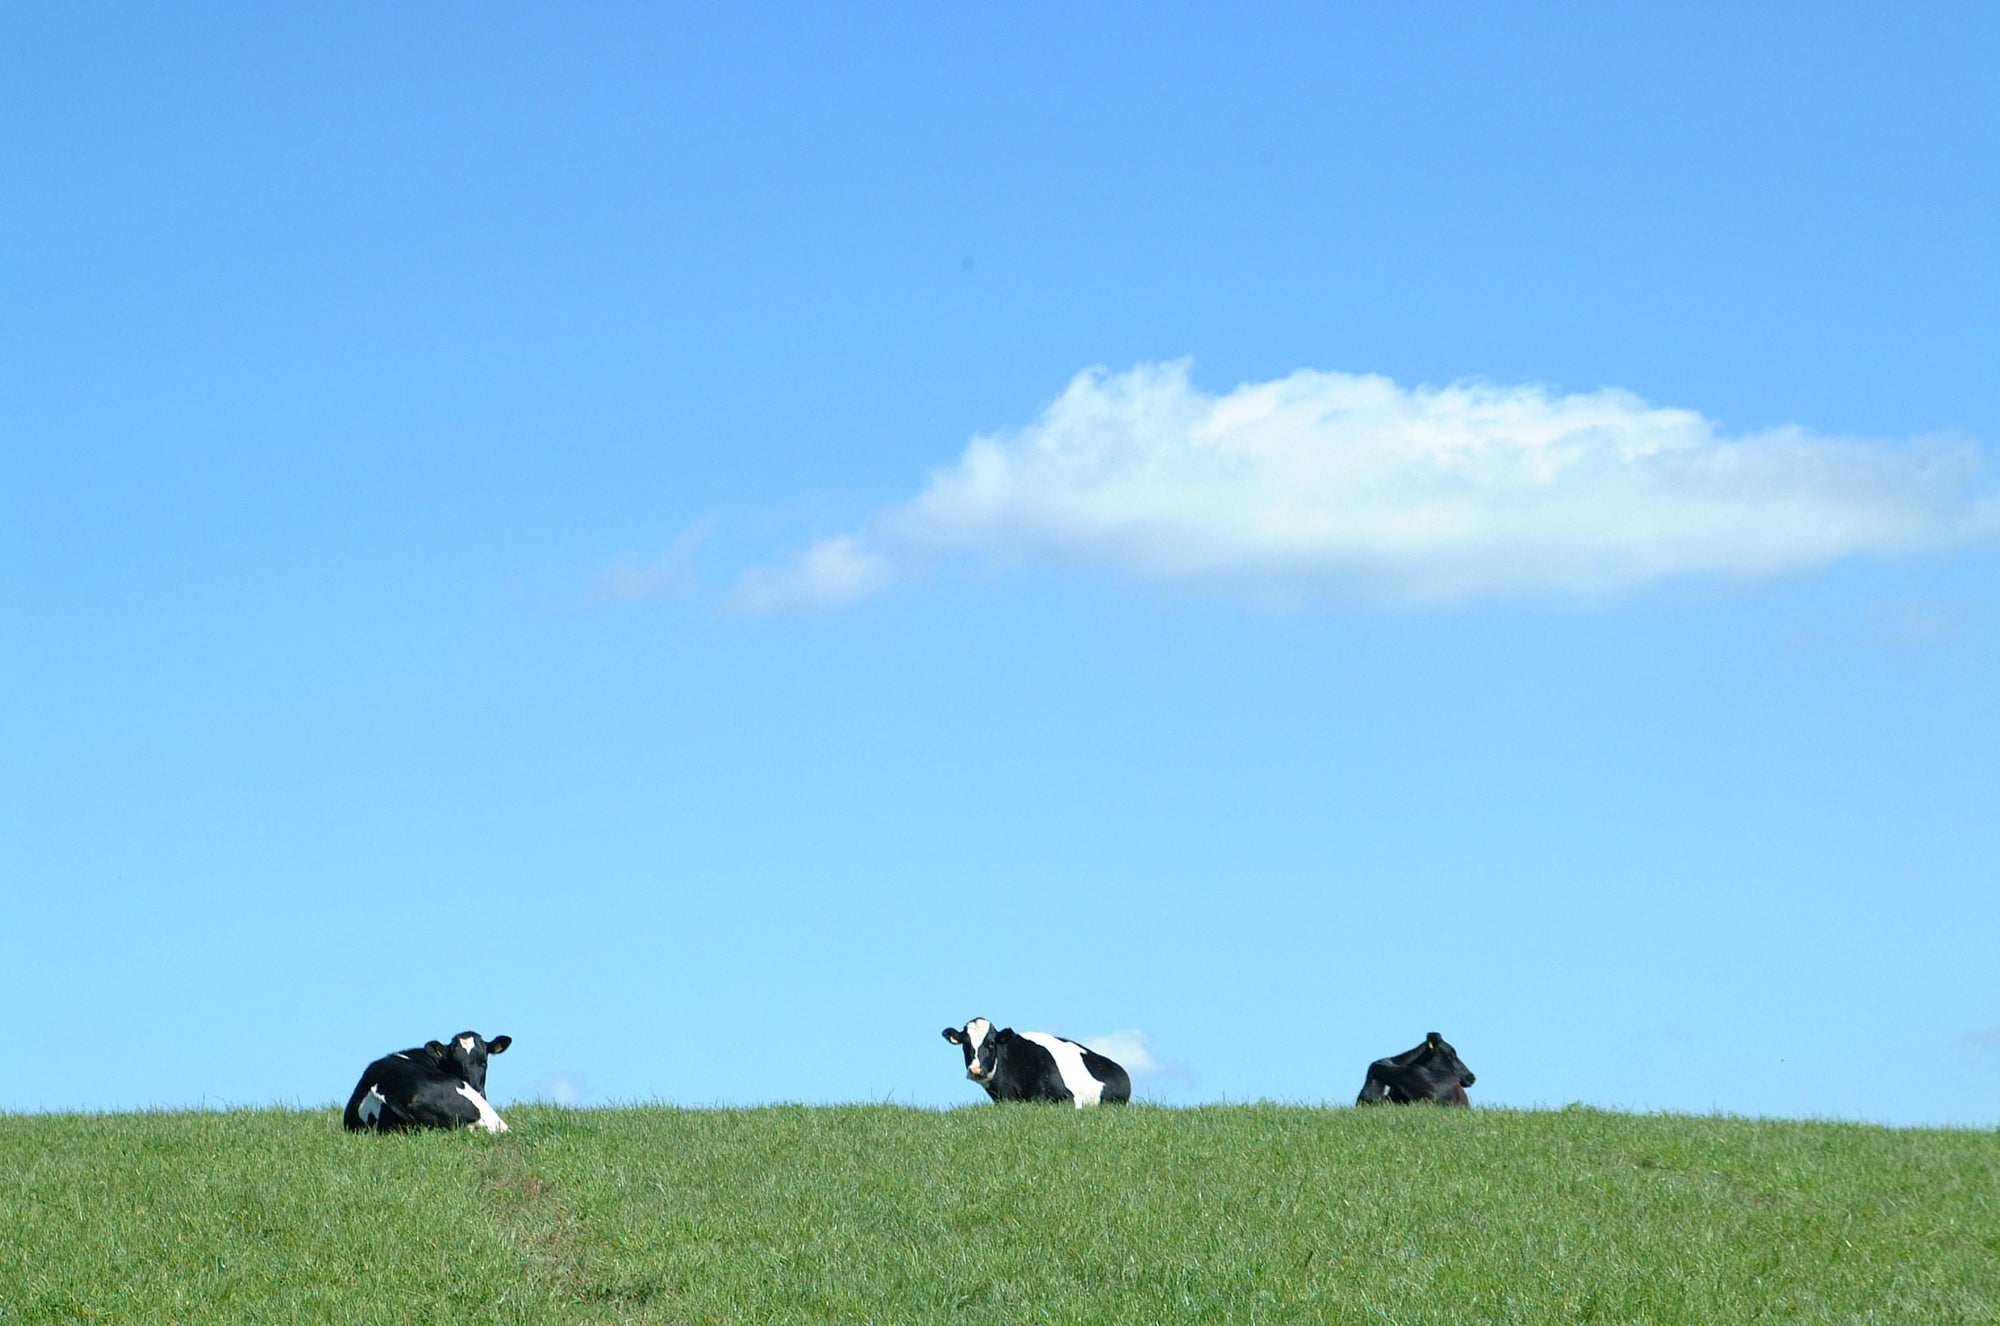 Cows laying on an outdoor grass field. This image is the cover image for an article explaining why oat milk is the better choice for the environment.